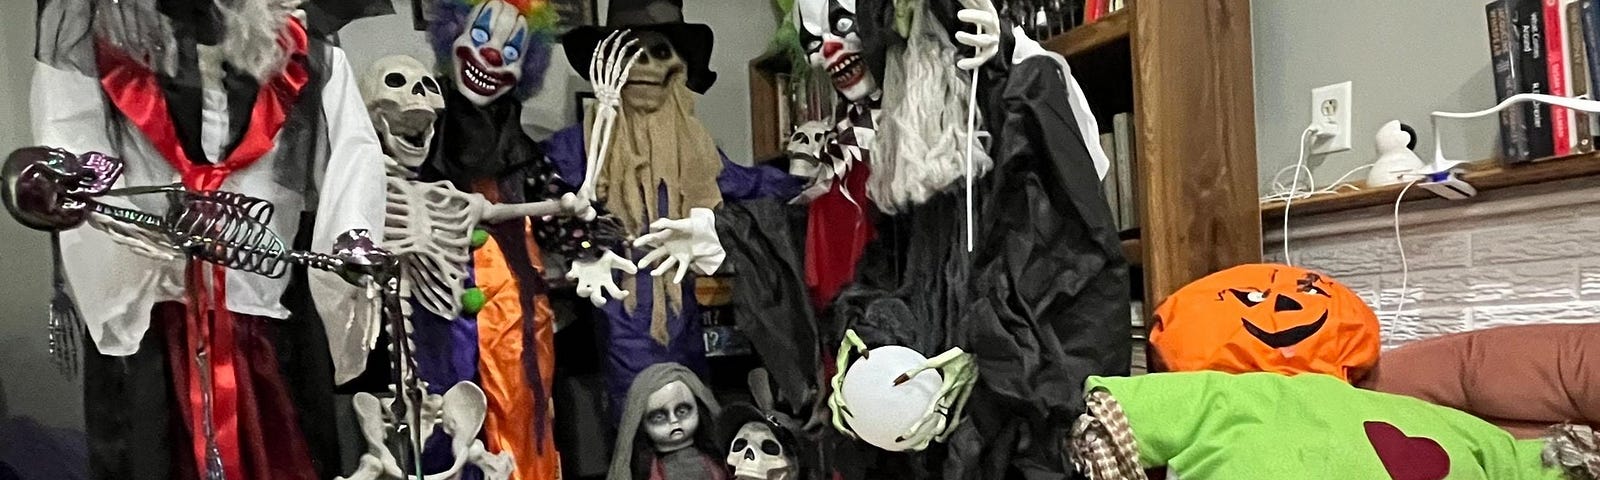 Several Halloween skeleton figurines posed together for a mock family photo.